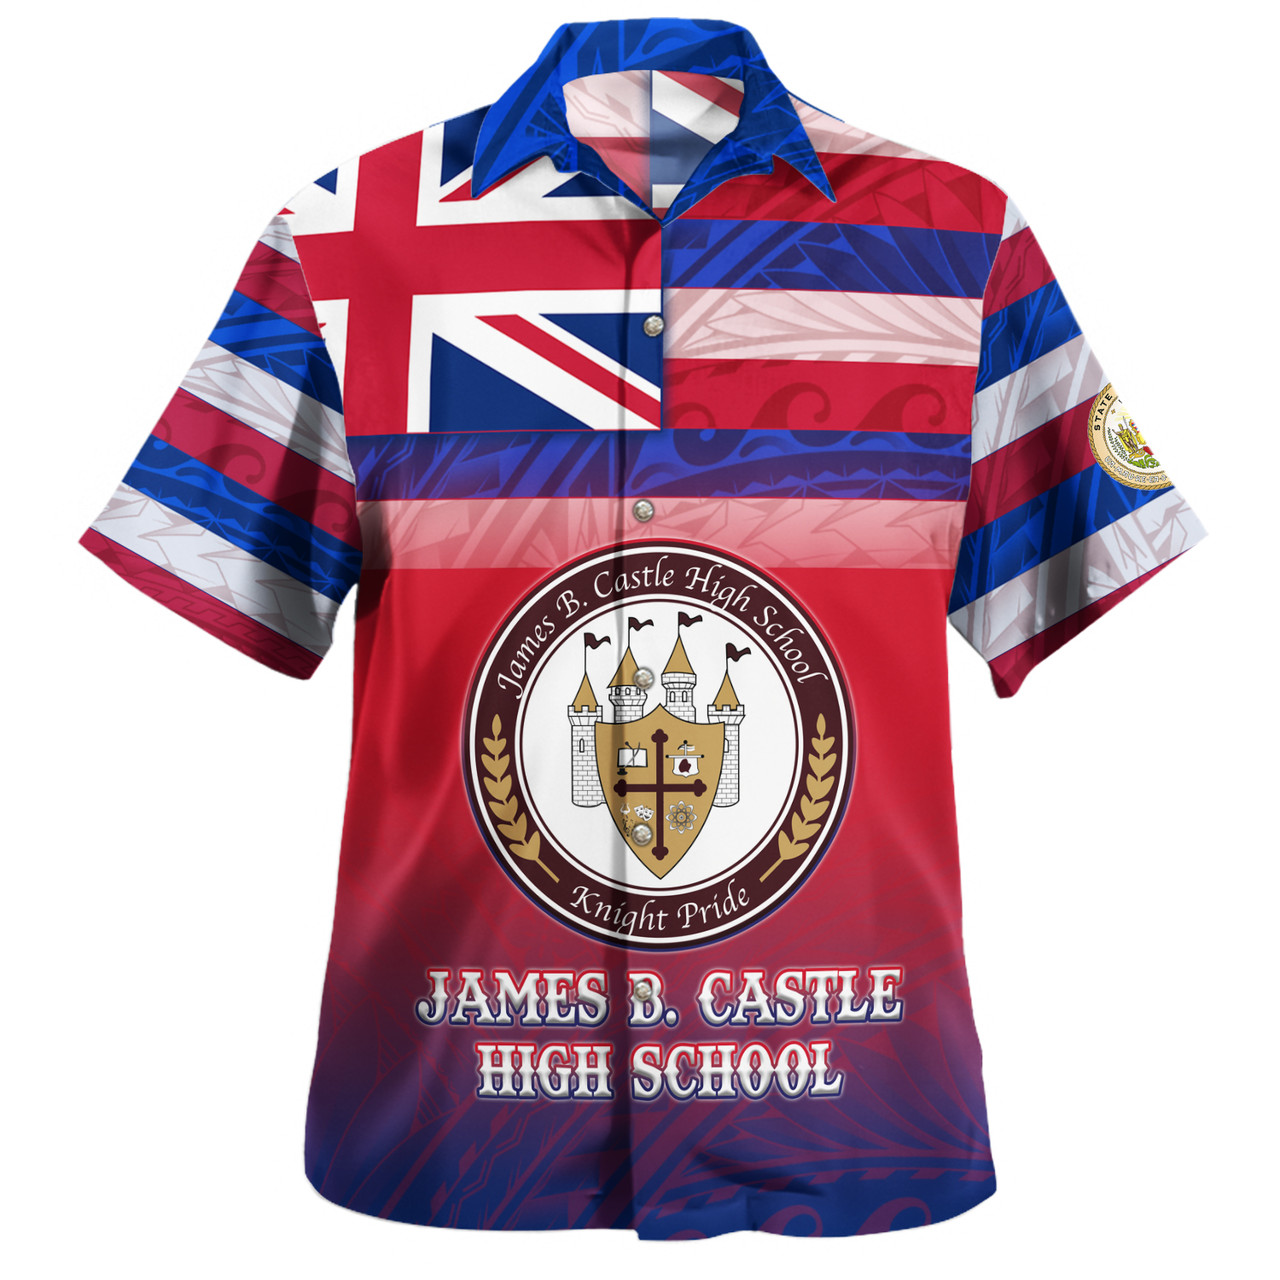 Hawaii James B. Castle High School Hawaii Shirt Flag Color With Traditional Patterns